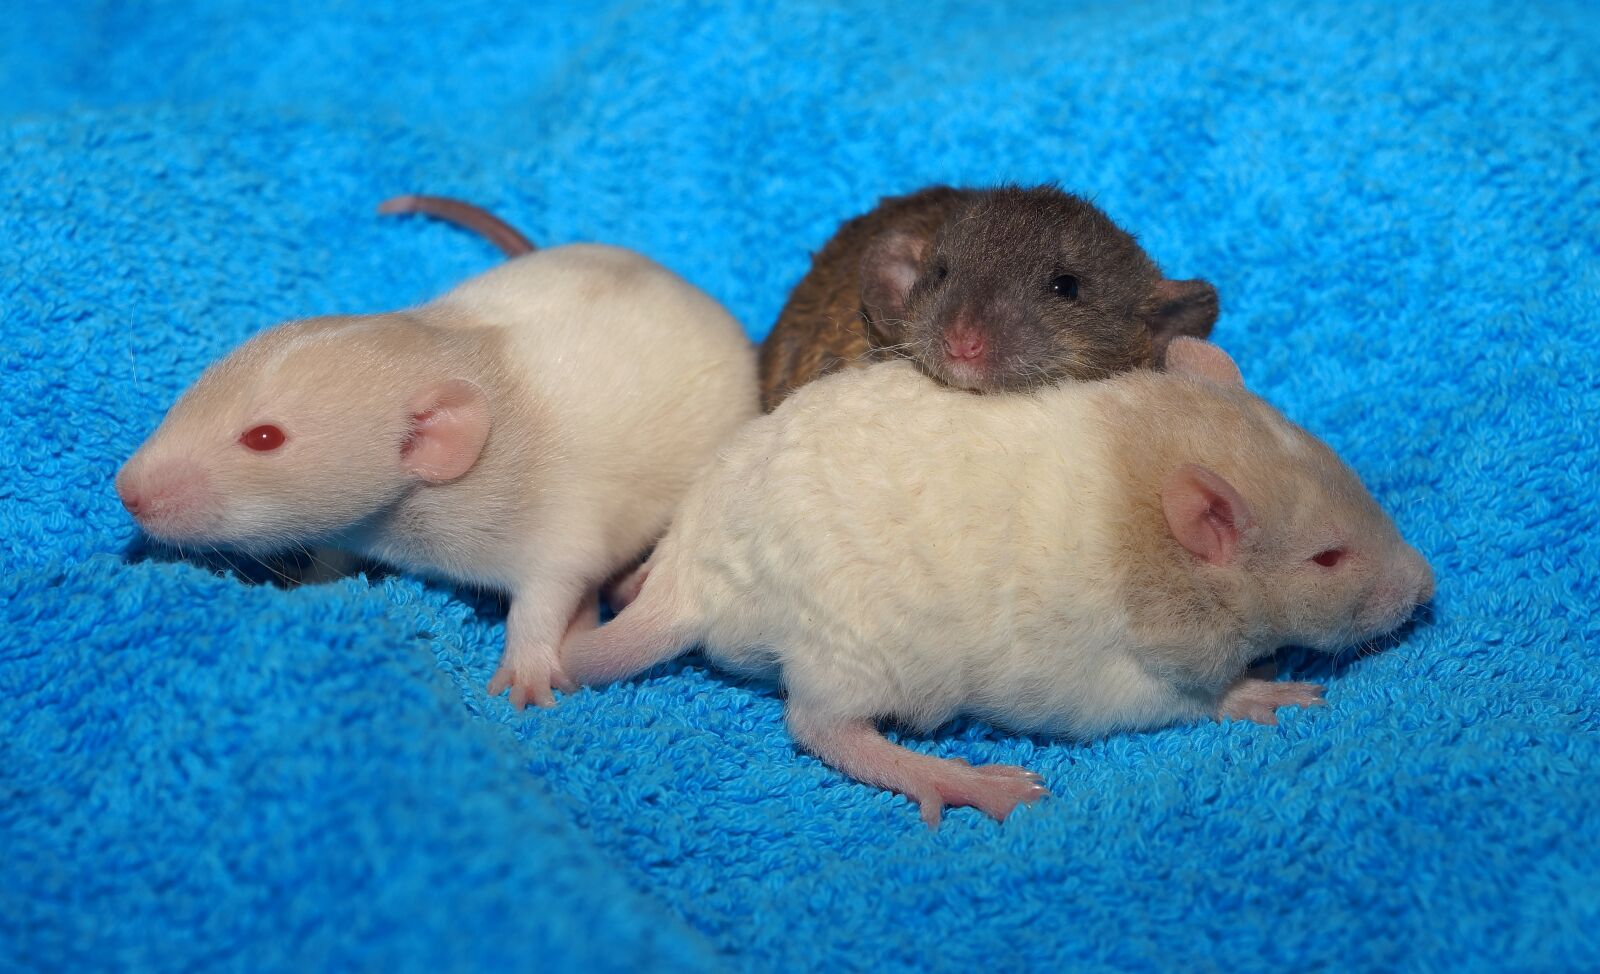 Sony a99 II sample photo. Babies, rat babies, rodents photography